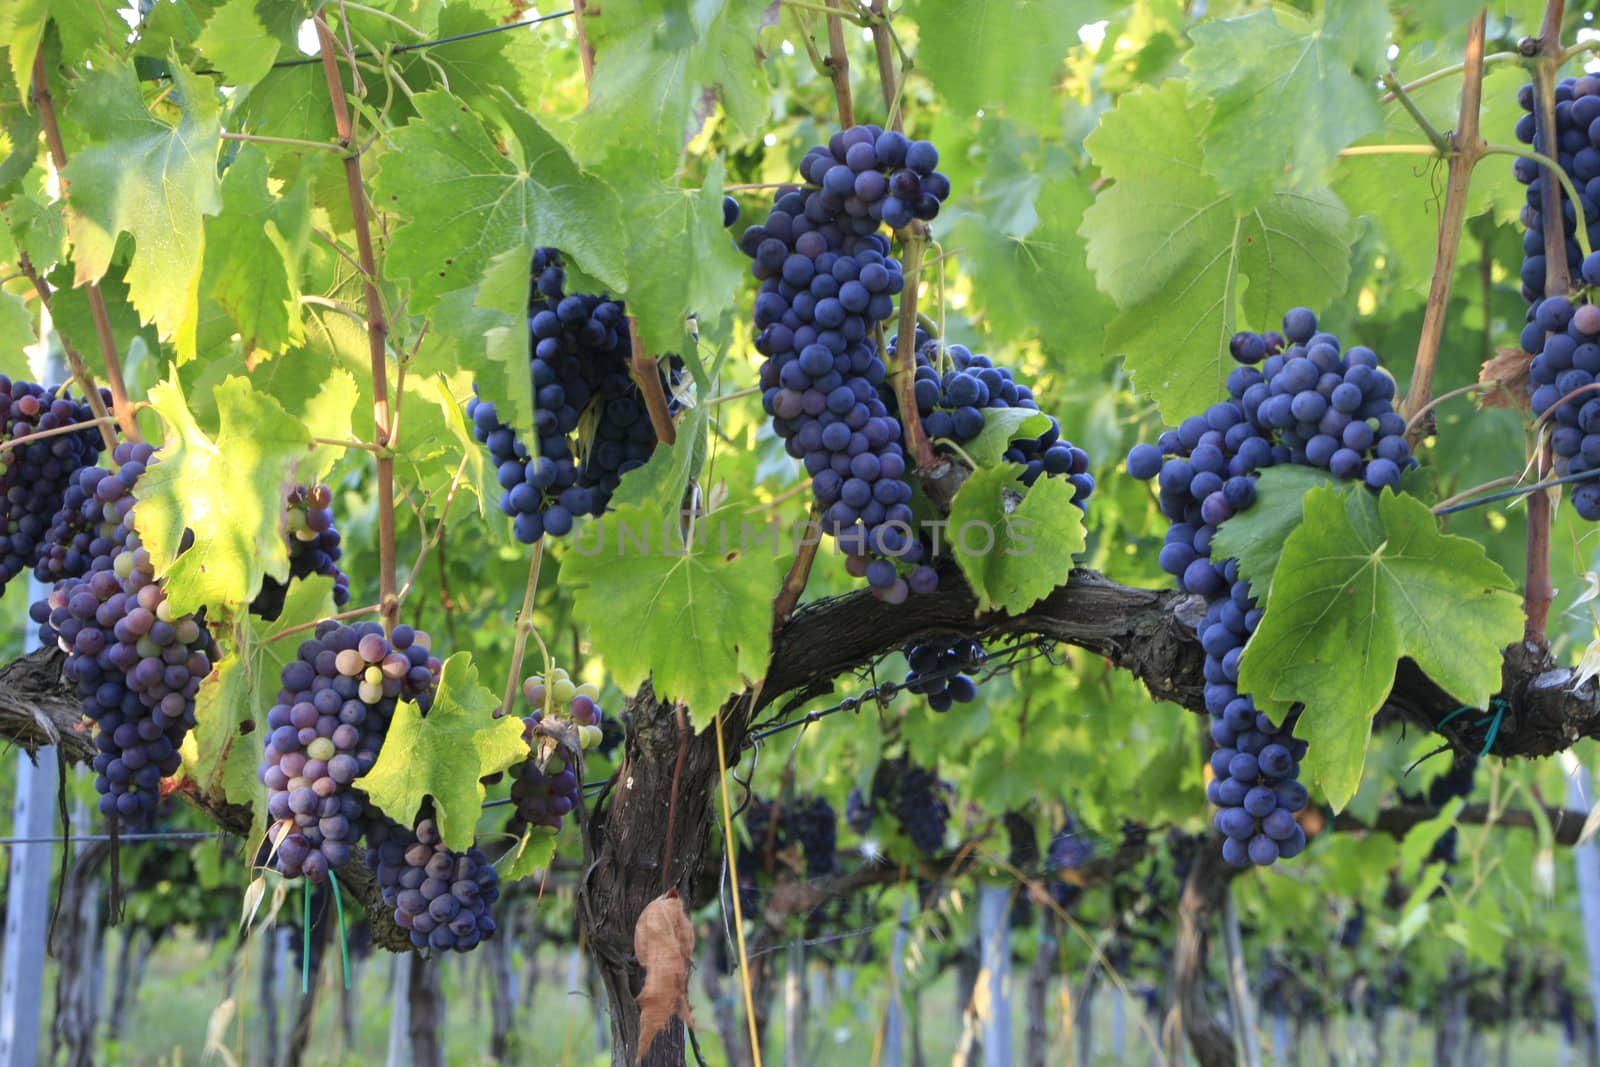 Grape bunches on a vine